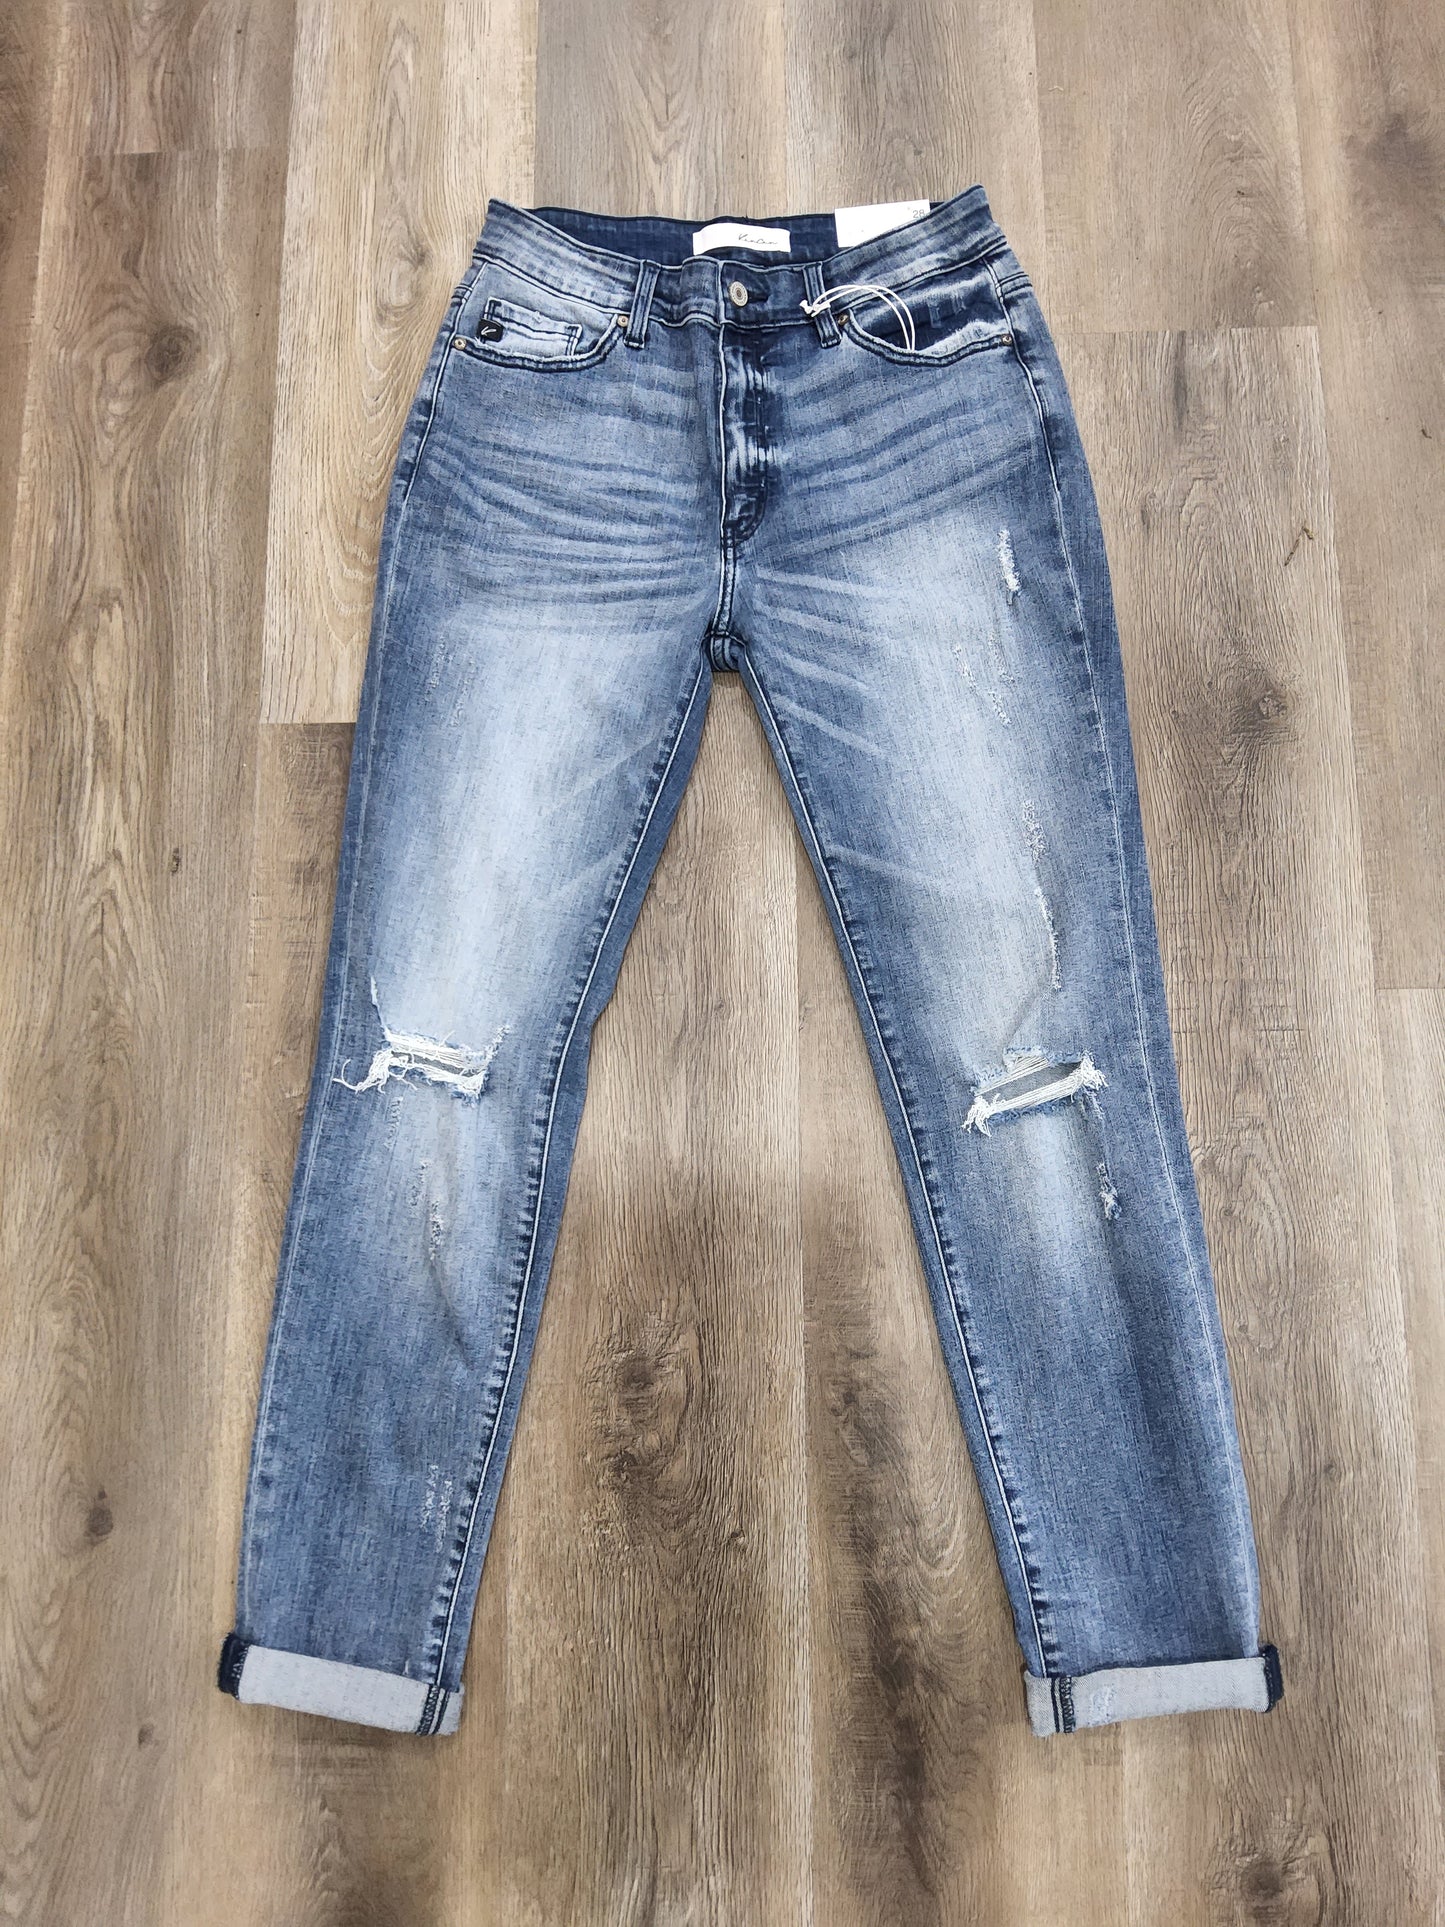 KAN CAN HIGH RISE ANKLE SKINNY DISTRESSED JEANS